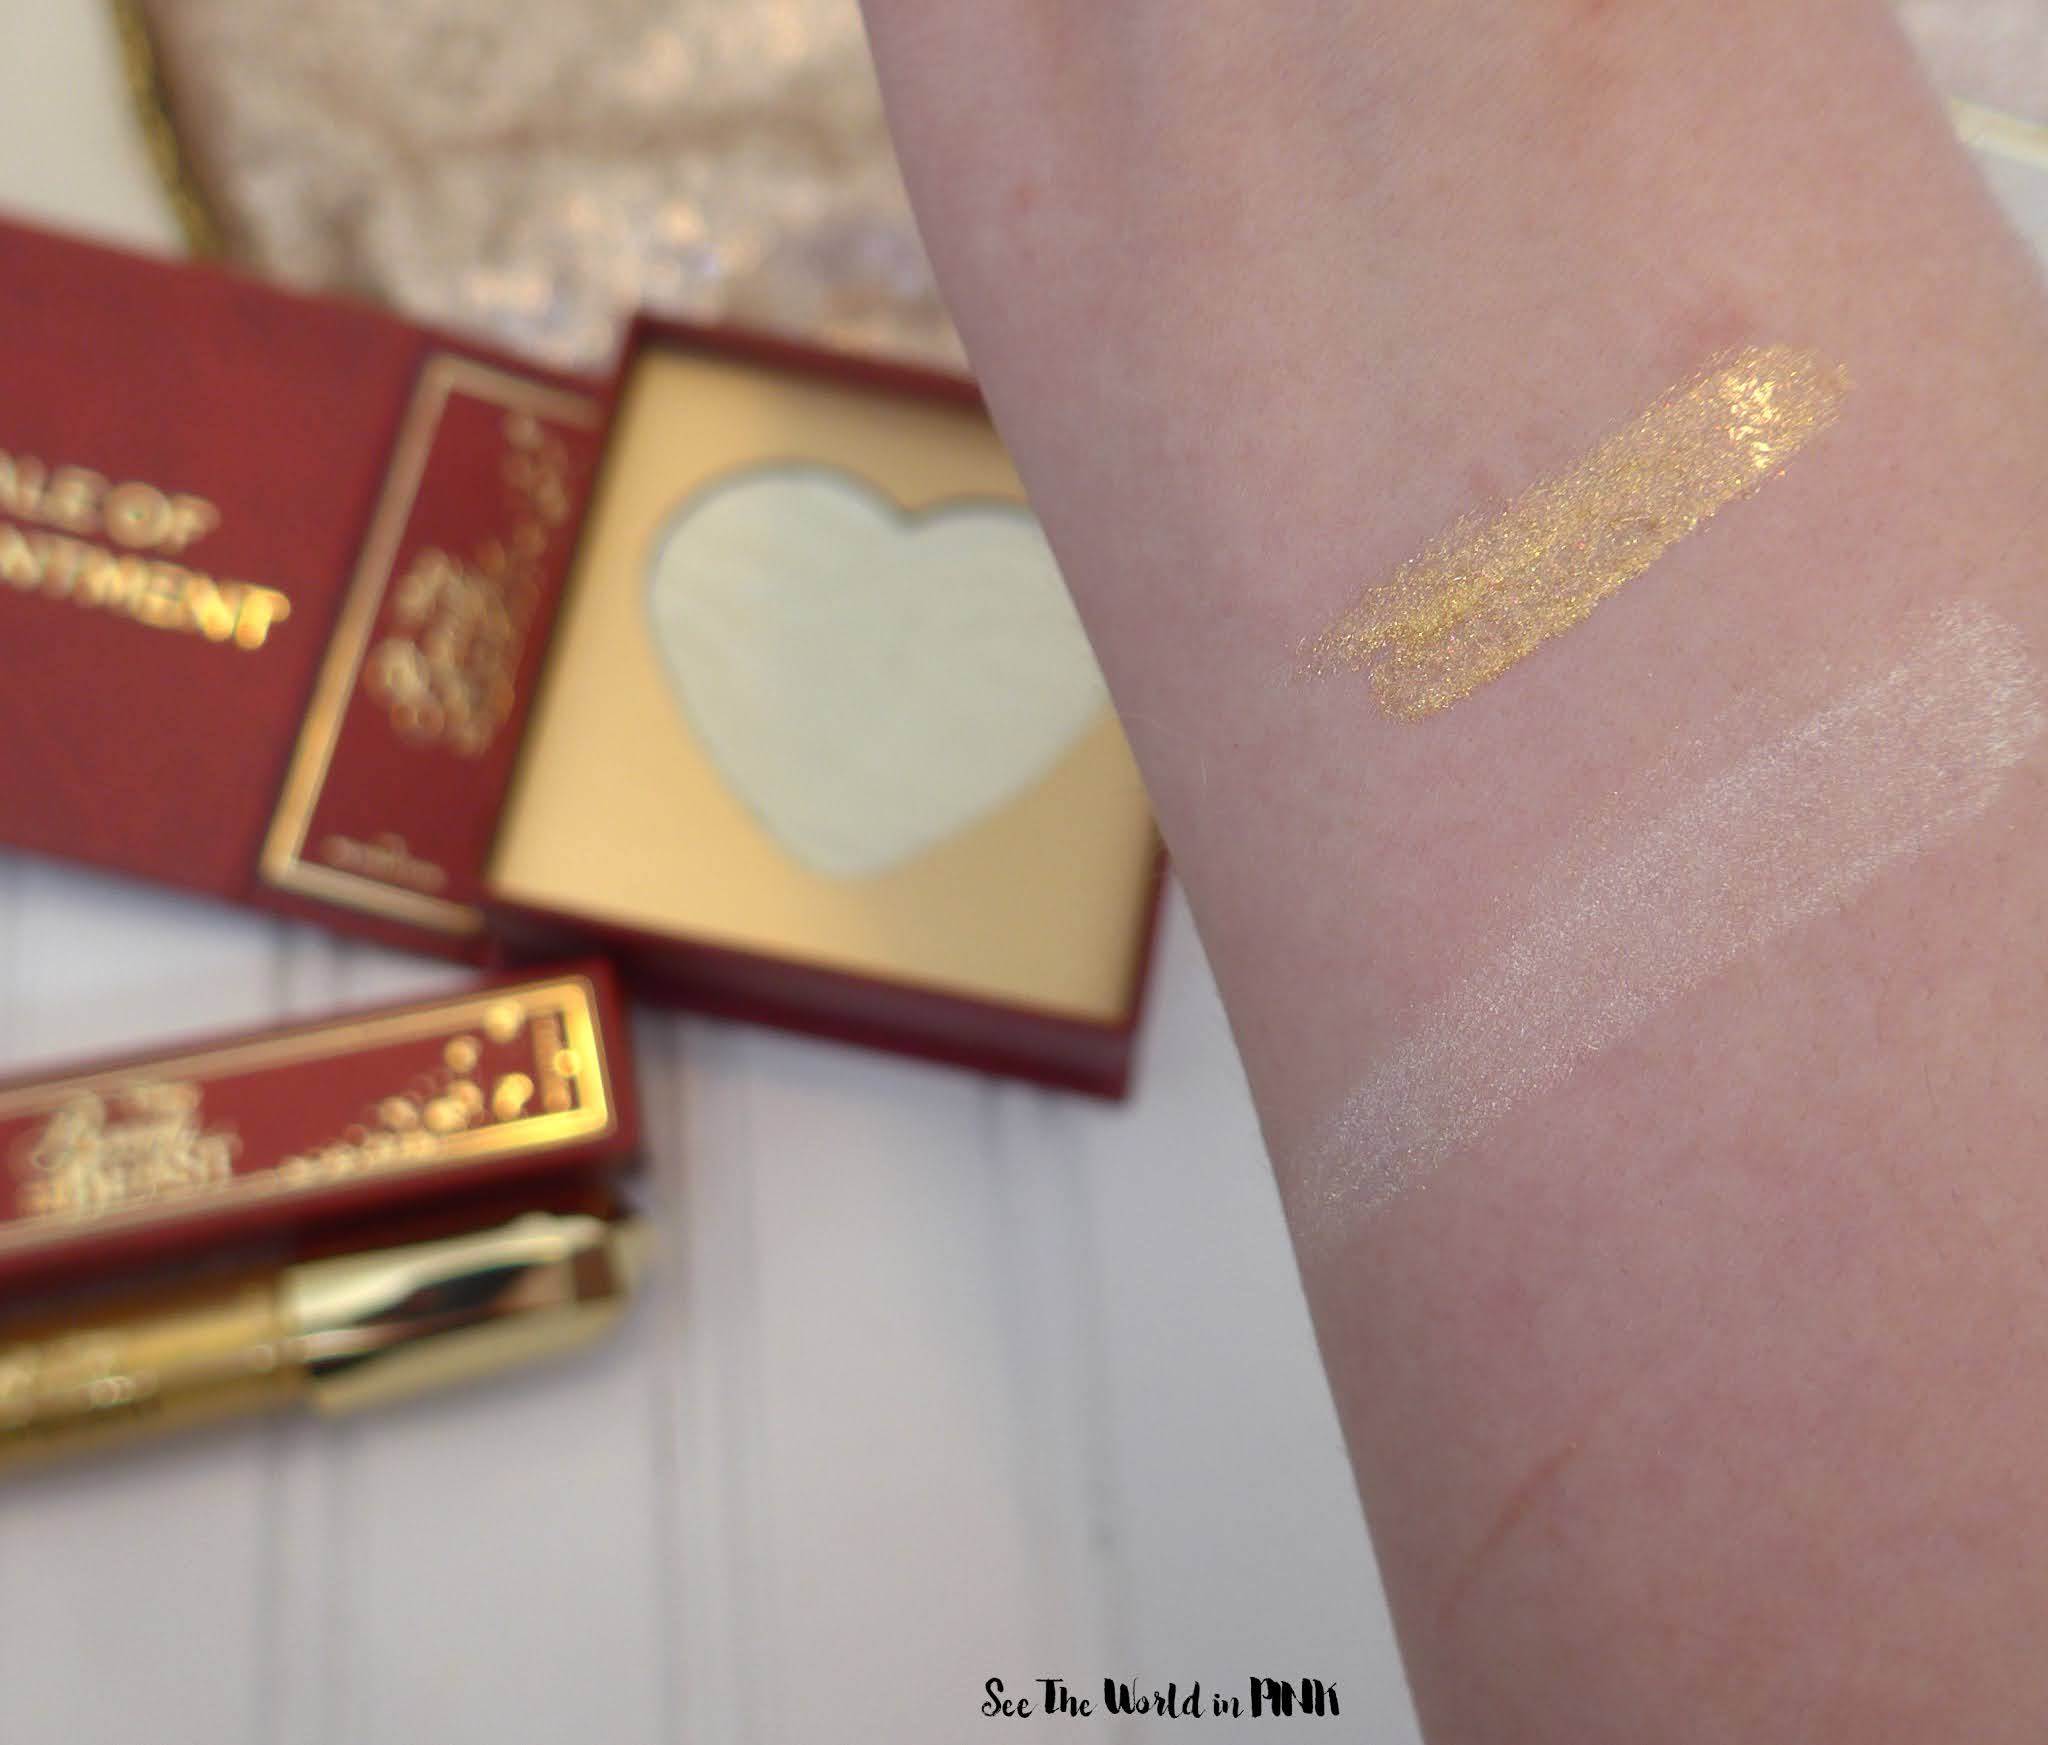 I Tried The Makeup Revolution "I Heart Revolution x Disney Fairytale Books Belle" Products So You Don't Have To...